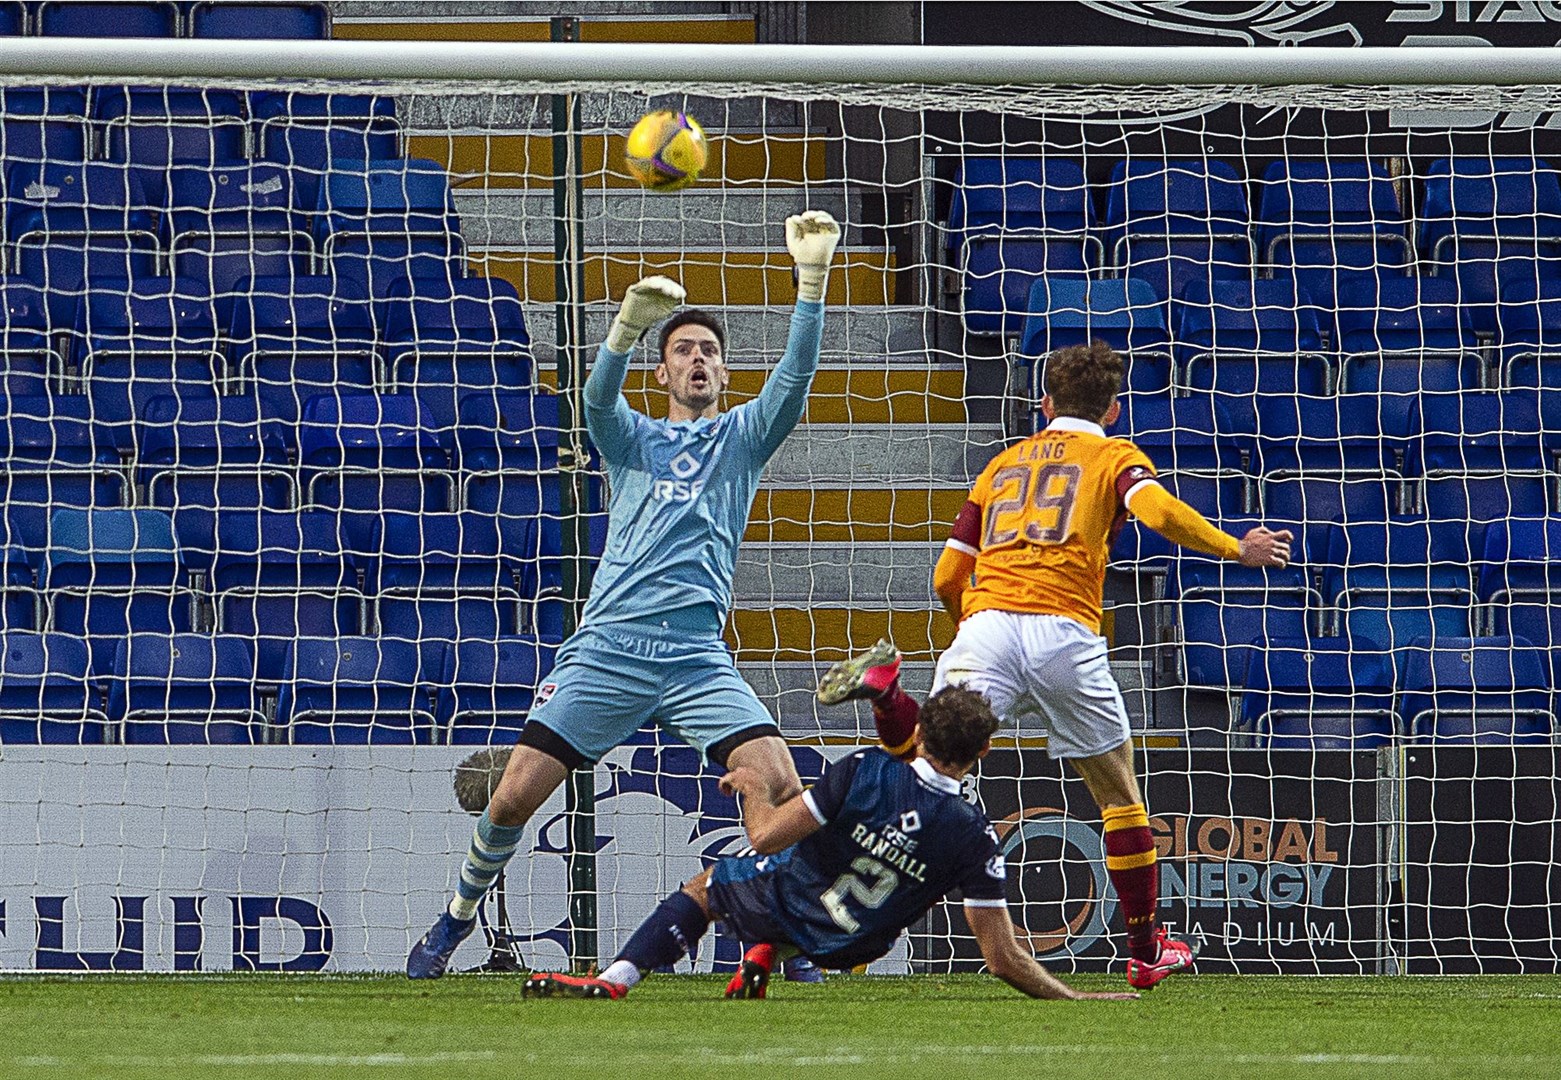 Picture - Ken Macpherson, Inverness. Ross County(1) v Motherwell(1). 03.08.20. Ross County 'keeper Ross Laidlaw makes a terrific point-blank save from Motherwell's Callum Lang.